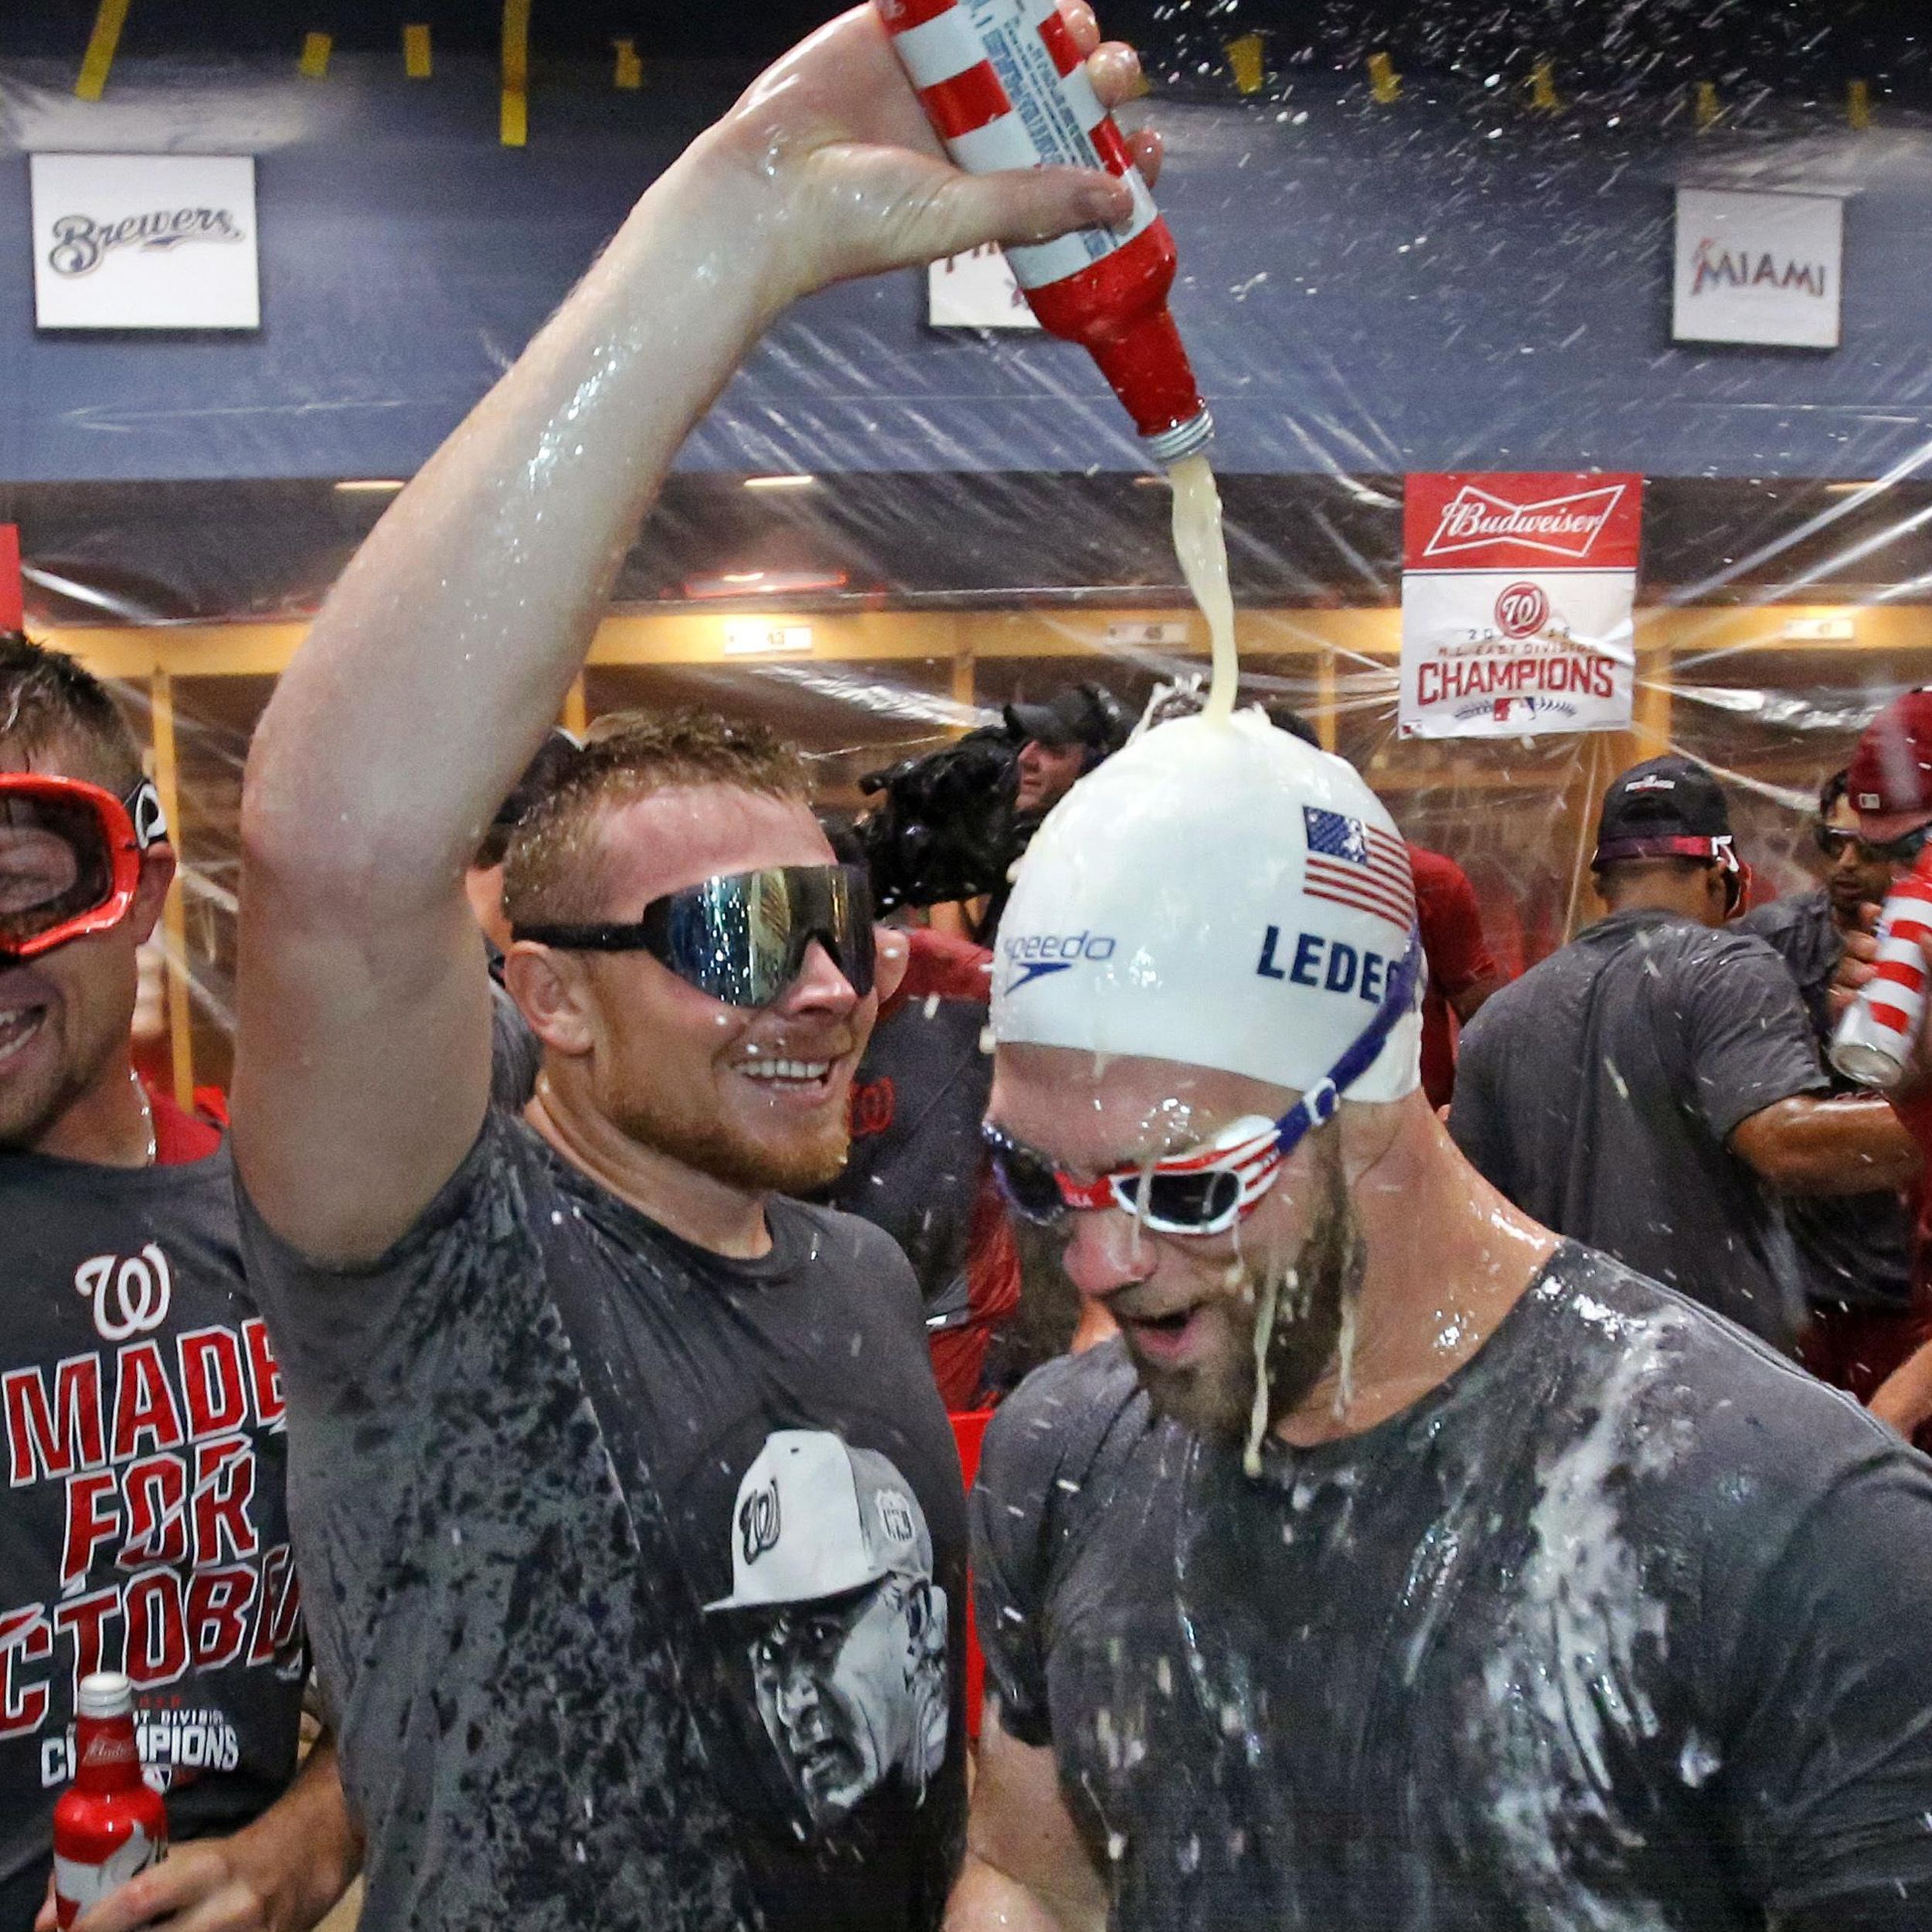 Washington Nationals clinch NL East: Your 2016 NL East Champions